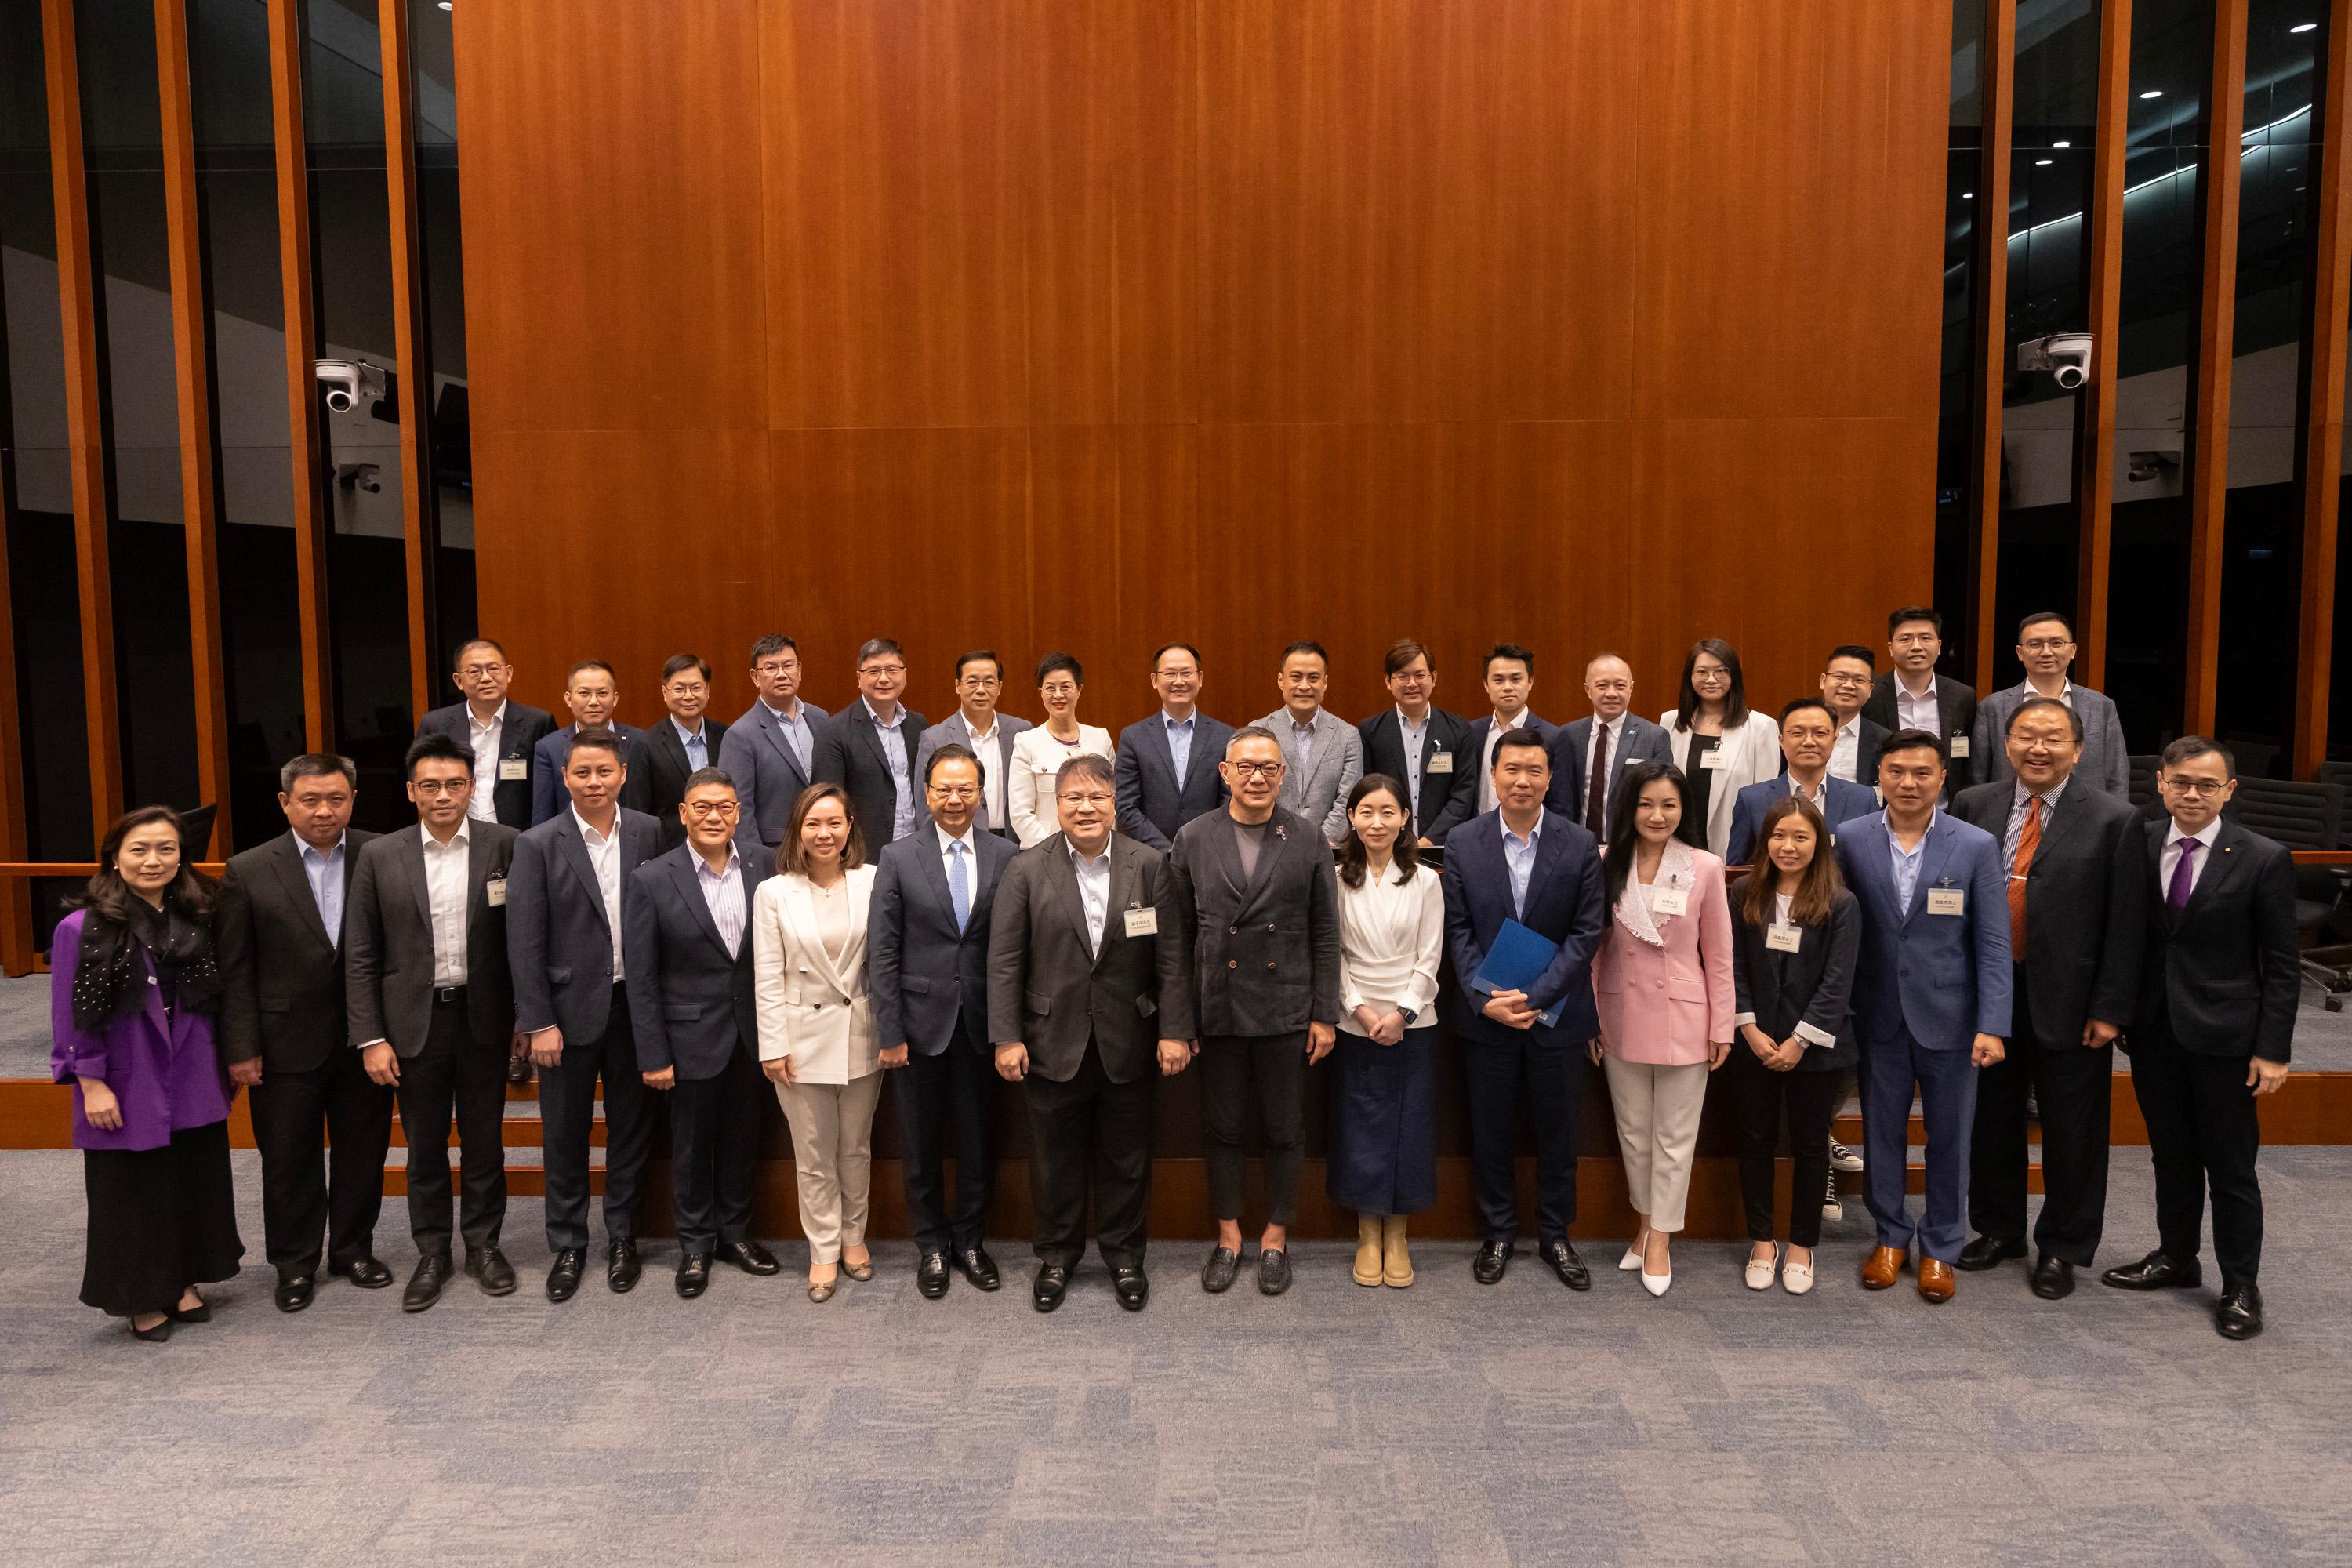 The Legislative Council (LegCo) Members meet with the new term Tai Po District Council (DC) and Central and Western DC members at the LegCo Complex today (May 31). Photo shows LegCo Members and members of the Central and Western DC posing for a group photo after the meeting.
